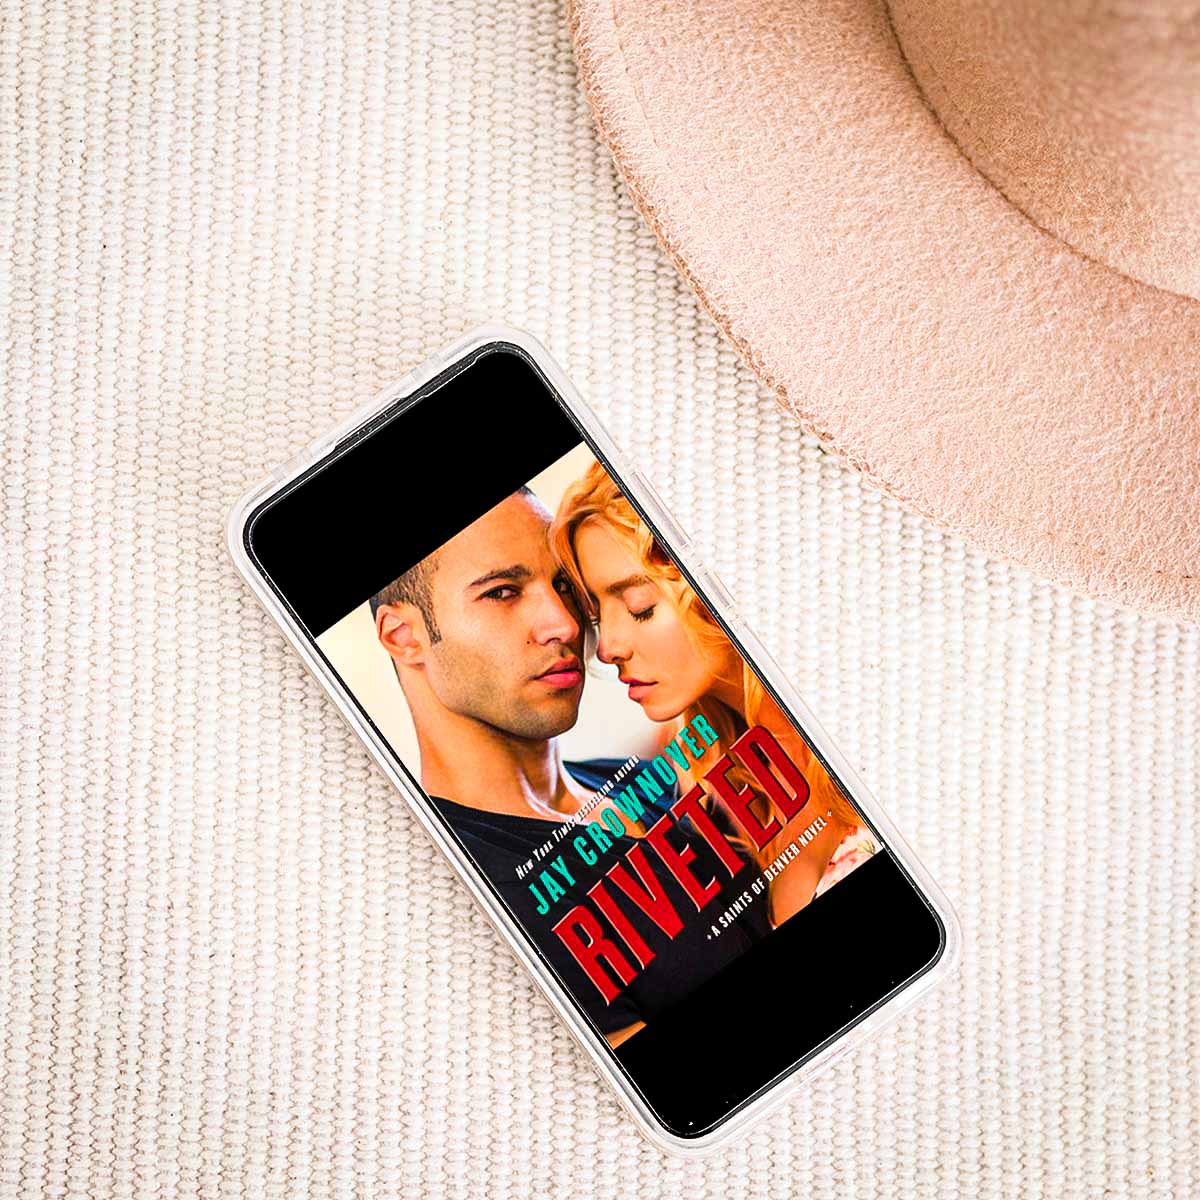 Riveted by Jay Crownover, the third book in the Saints of Denver series is the story of Church and Dixie and is an opposites attract, friends-to-lovers romance